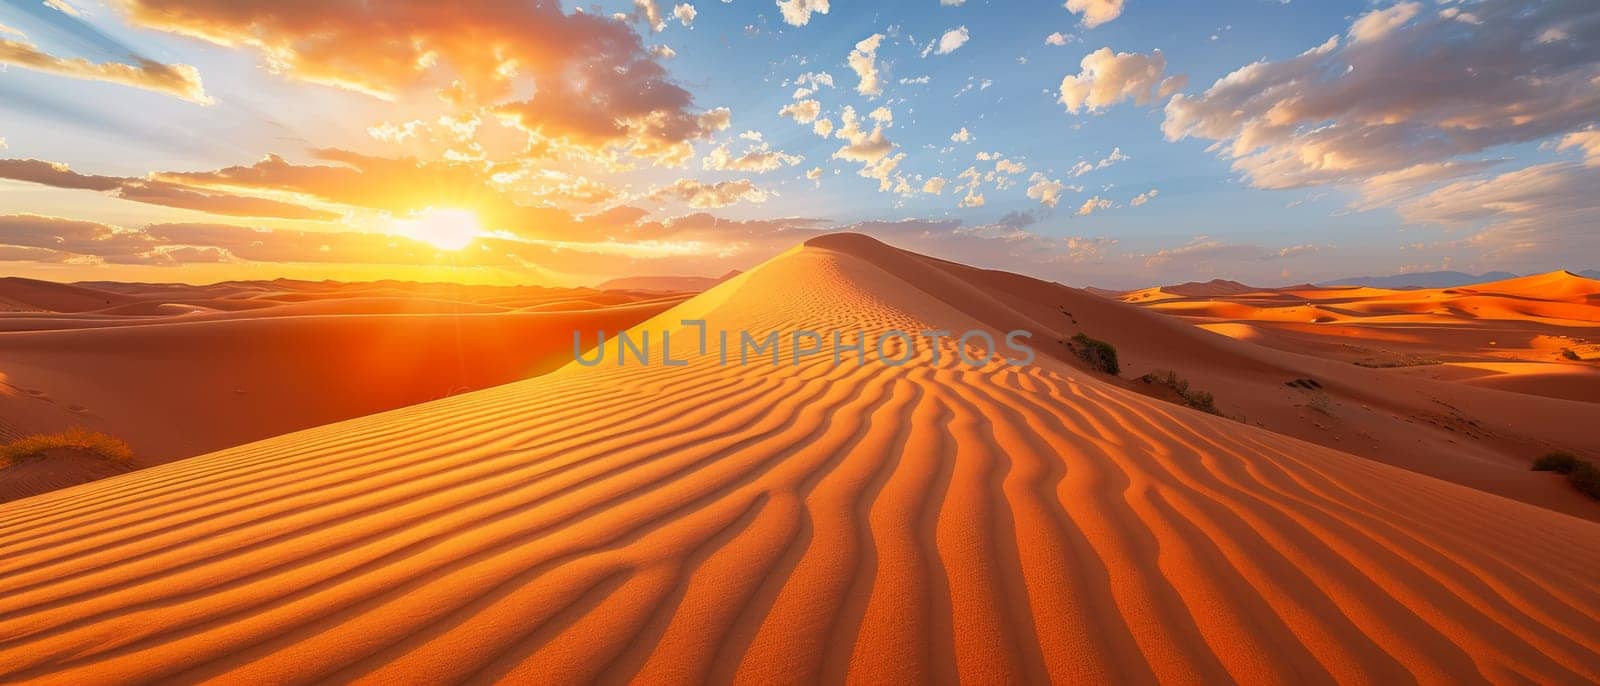 Evening light washes over the desert, highlighting the intricate ripples in the sand. A serene sunset bathes the landscape in a warm embrace. by sfinks